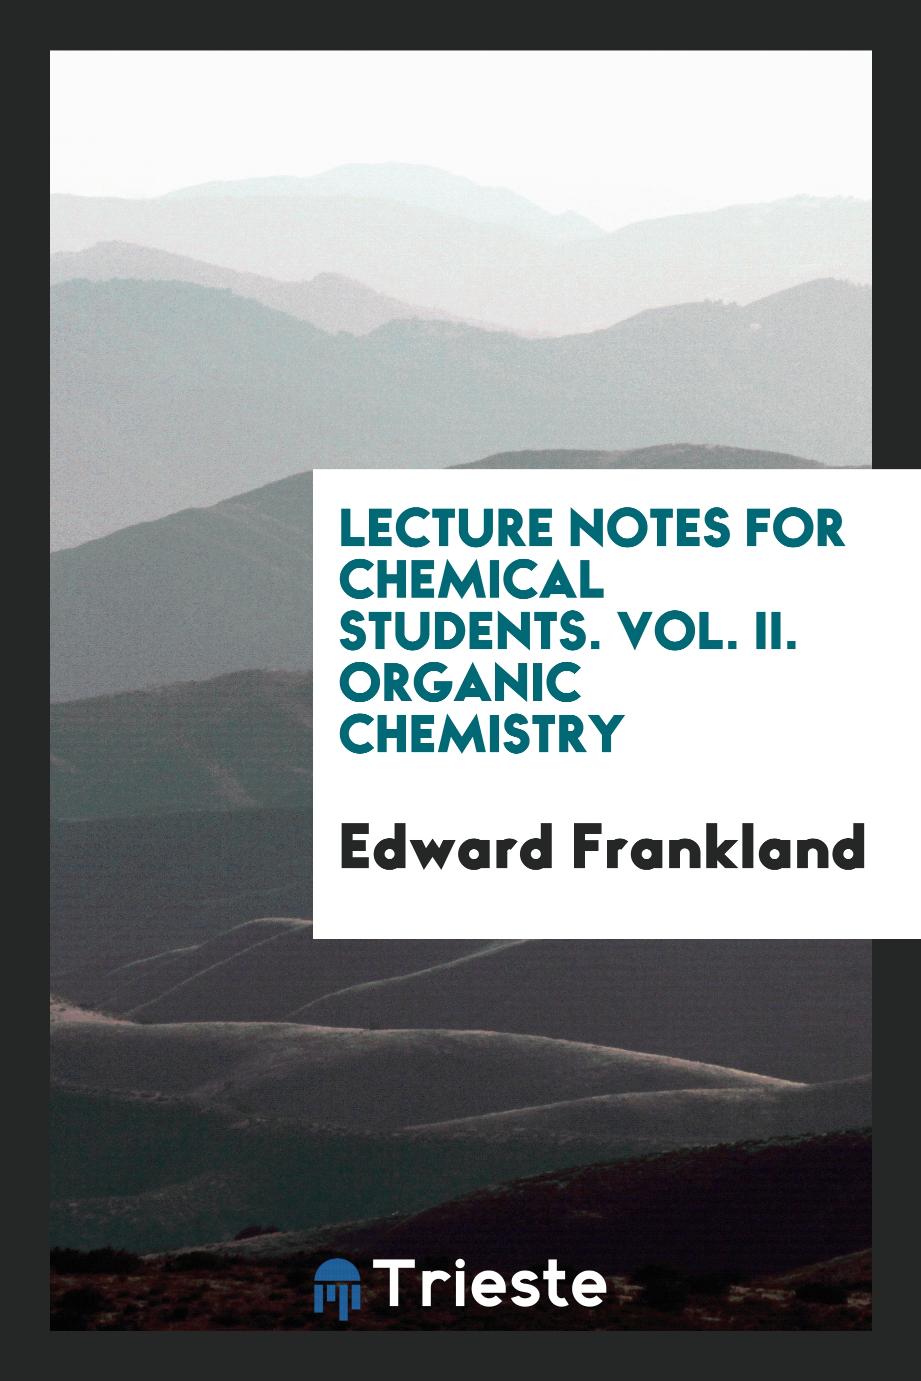 Lecture Notes for Chemical Students. Vol. II. Organic Chemistry